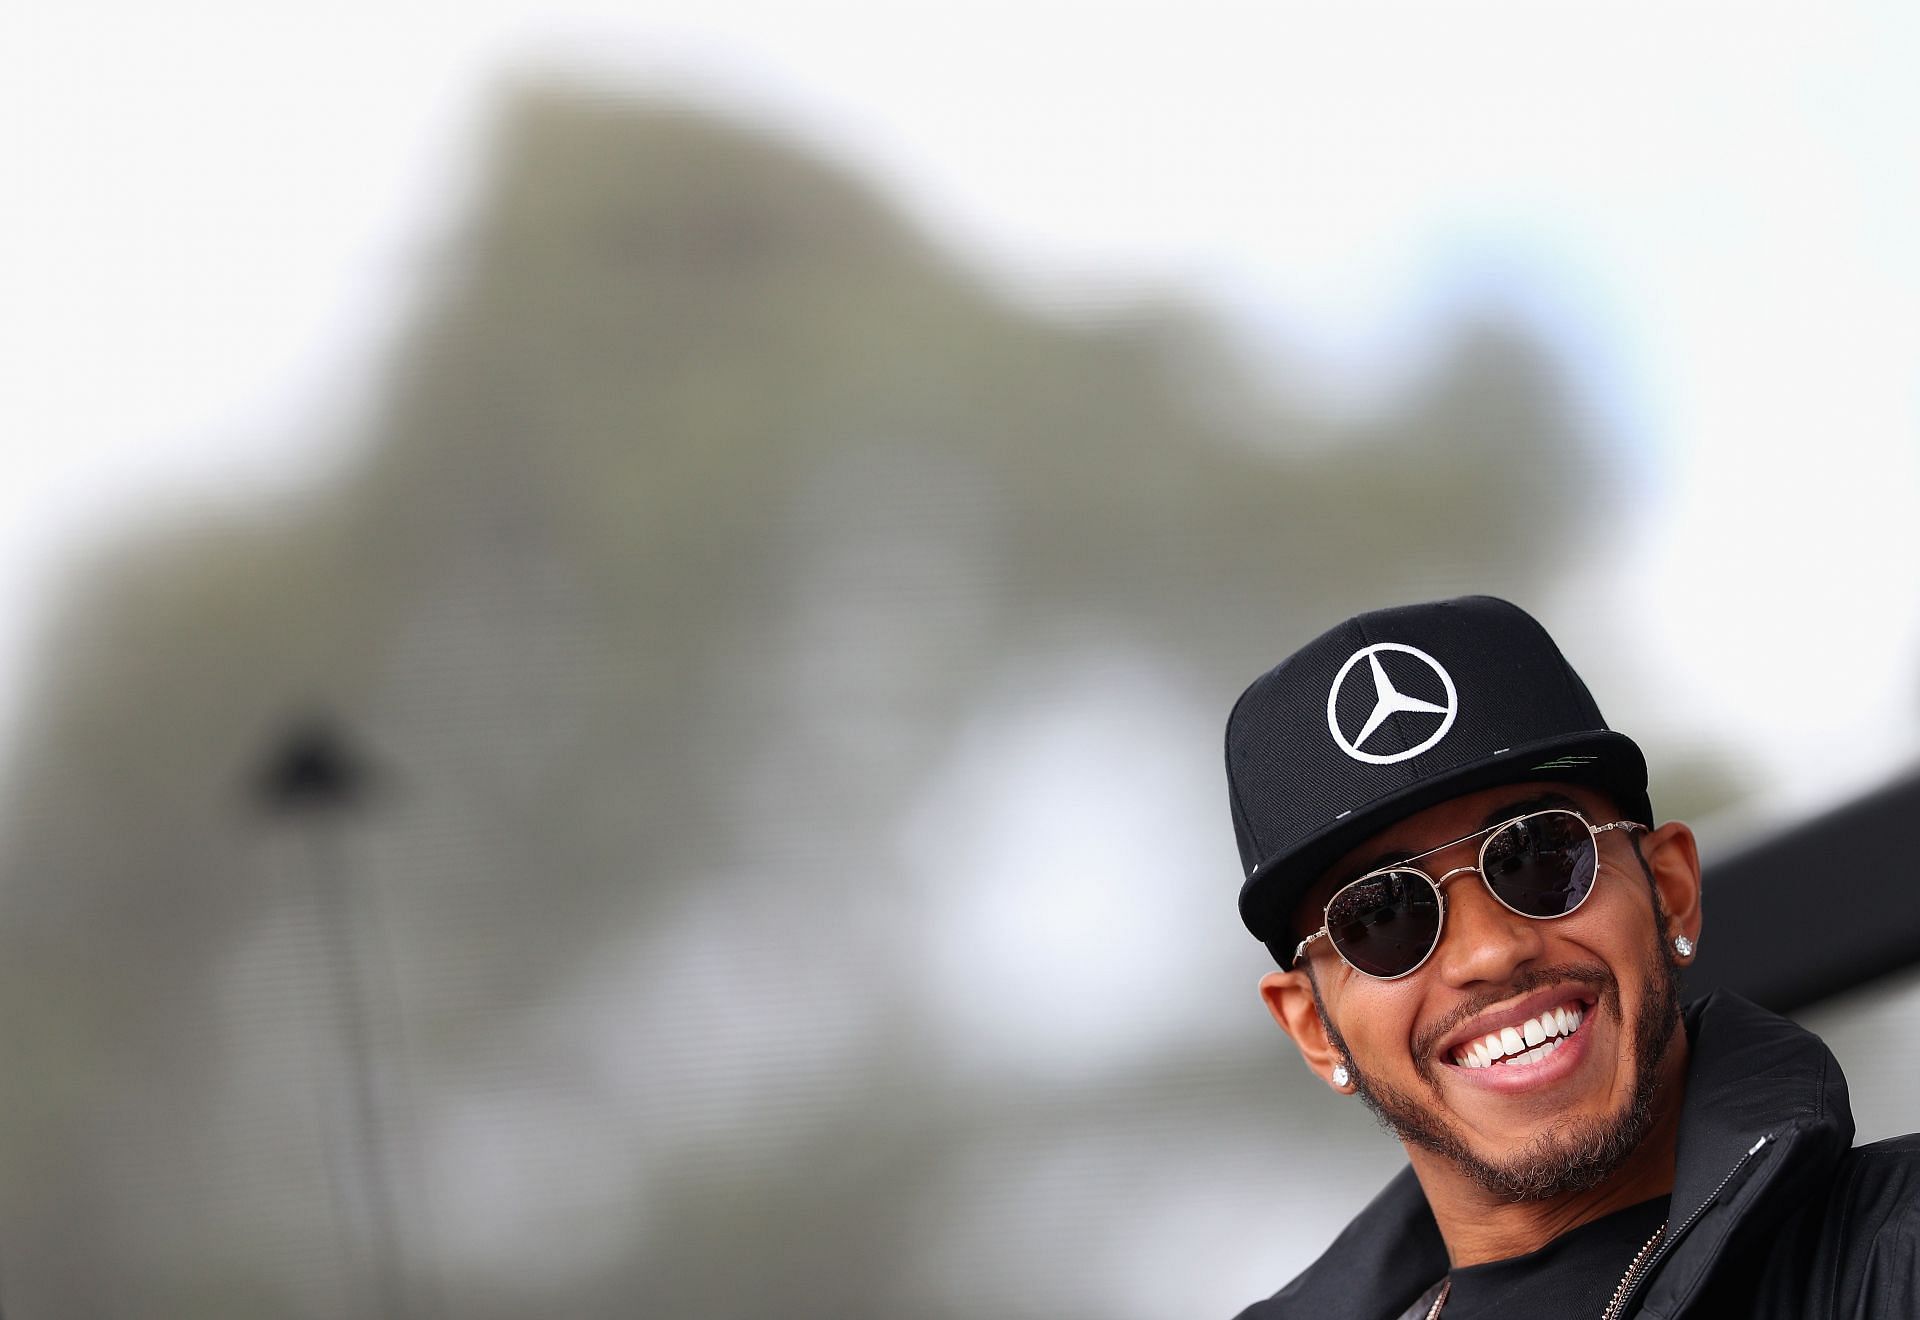 Lewis Hamilton will go down in F1 history as an all-time great